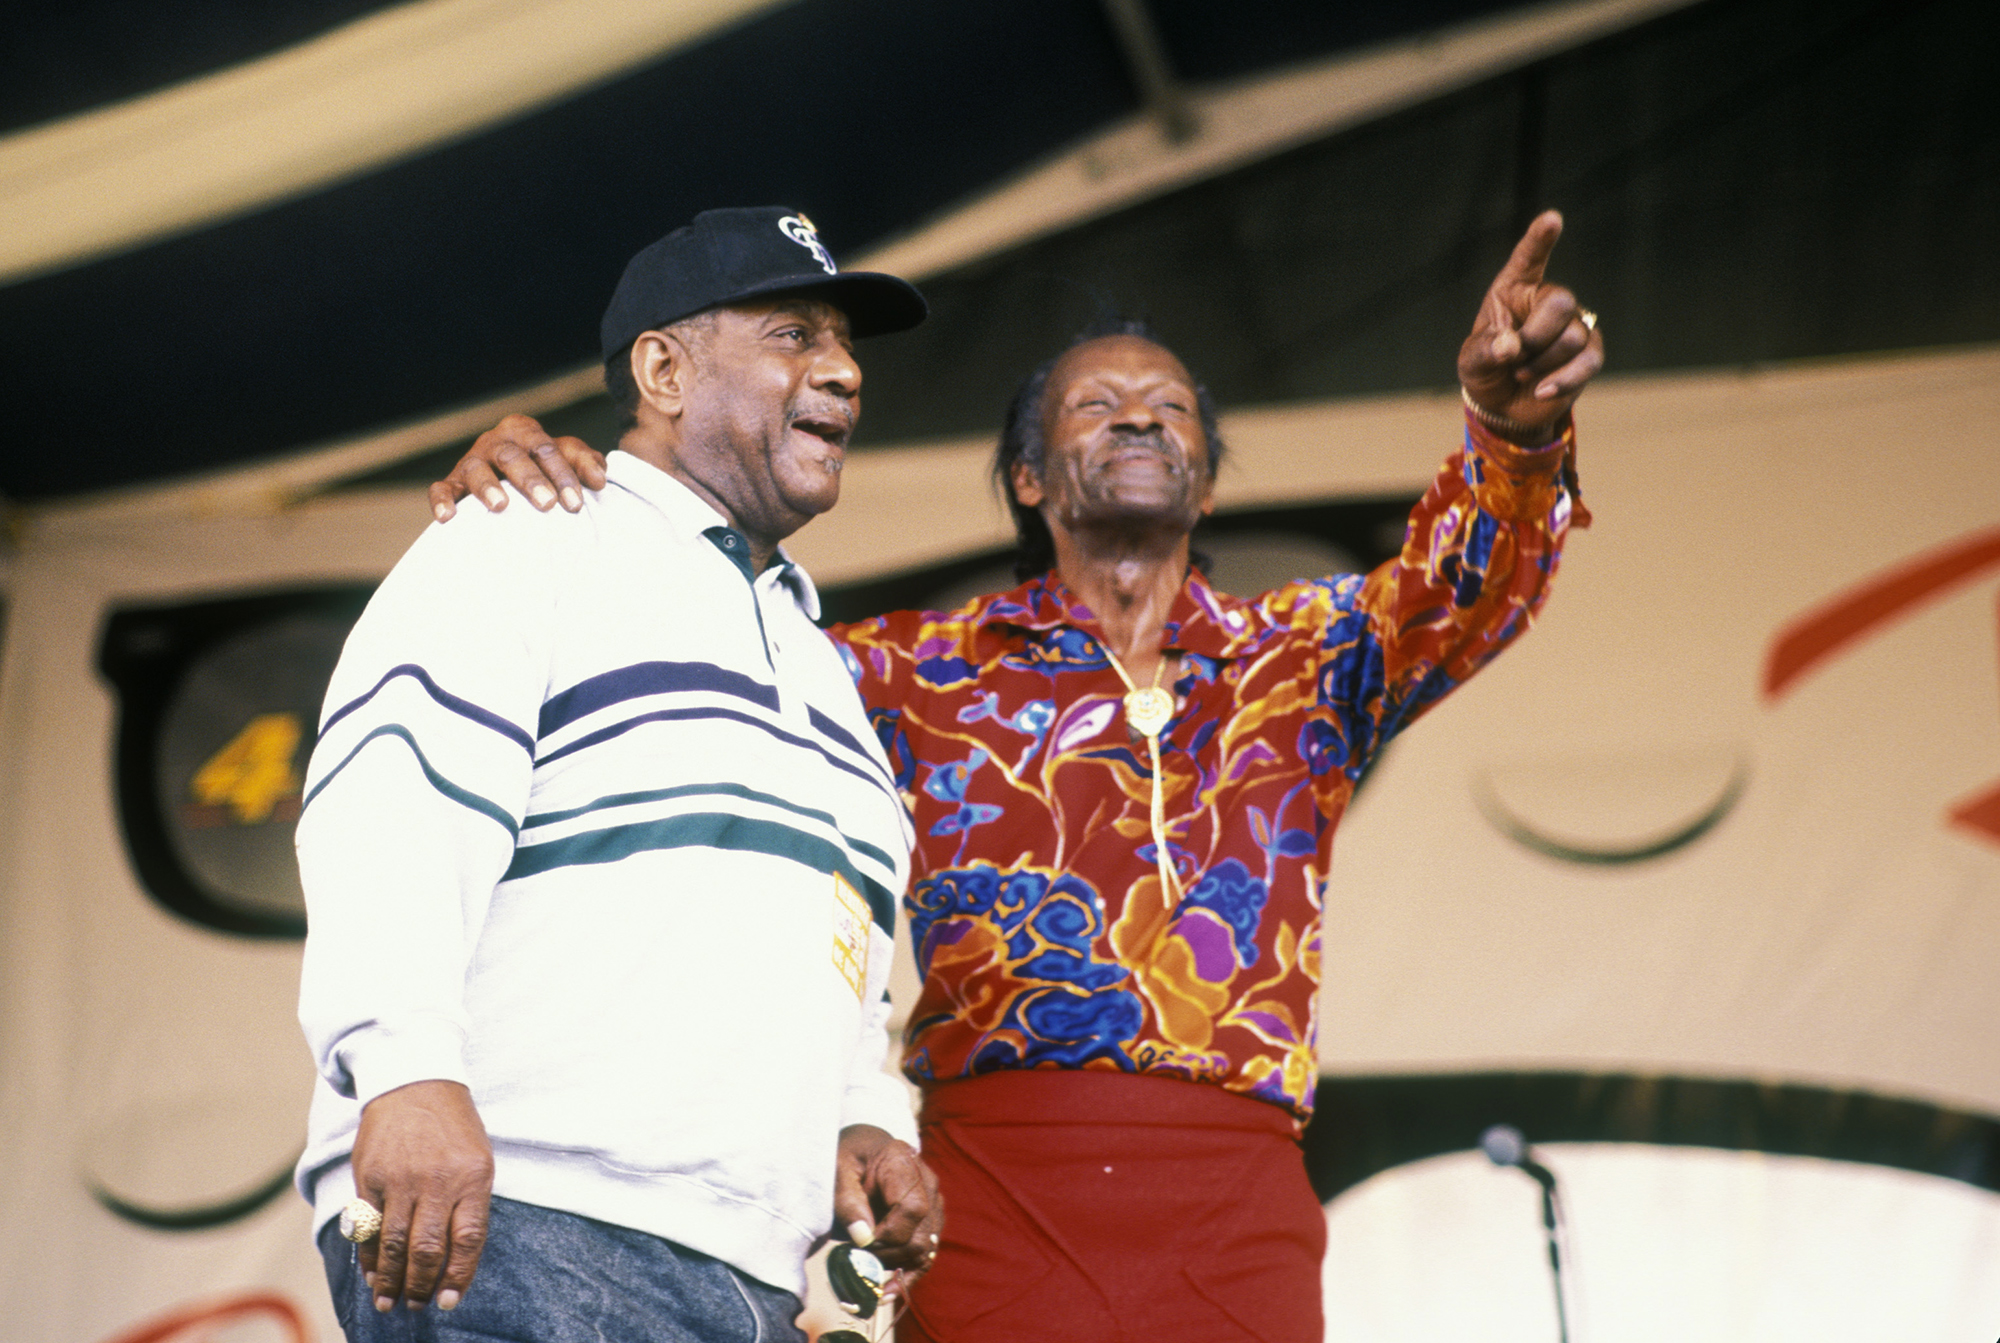 Chuck Berry and longtime pianist Johnnie Johnson at the New Orleans Jazz Festival in New Orleans, La., on April 30, 1995